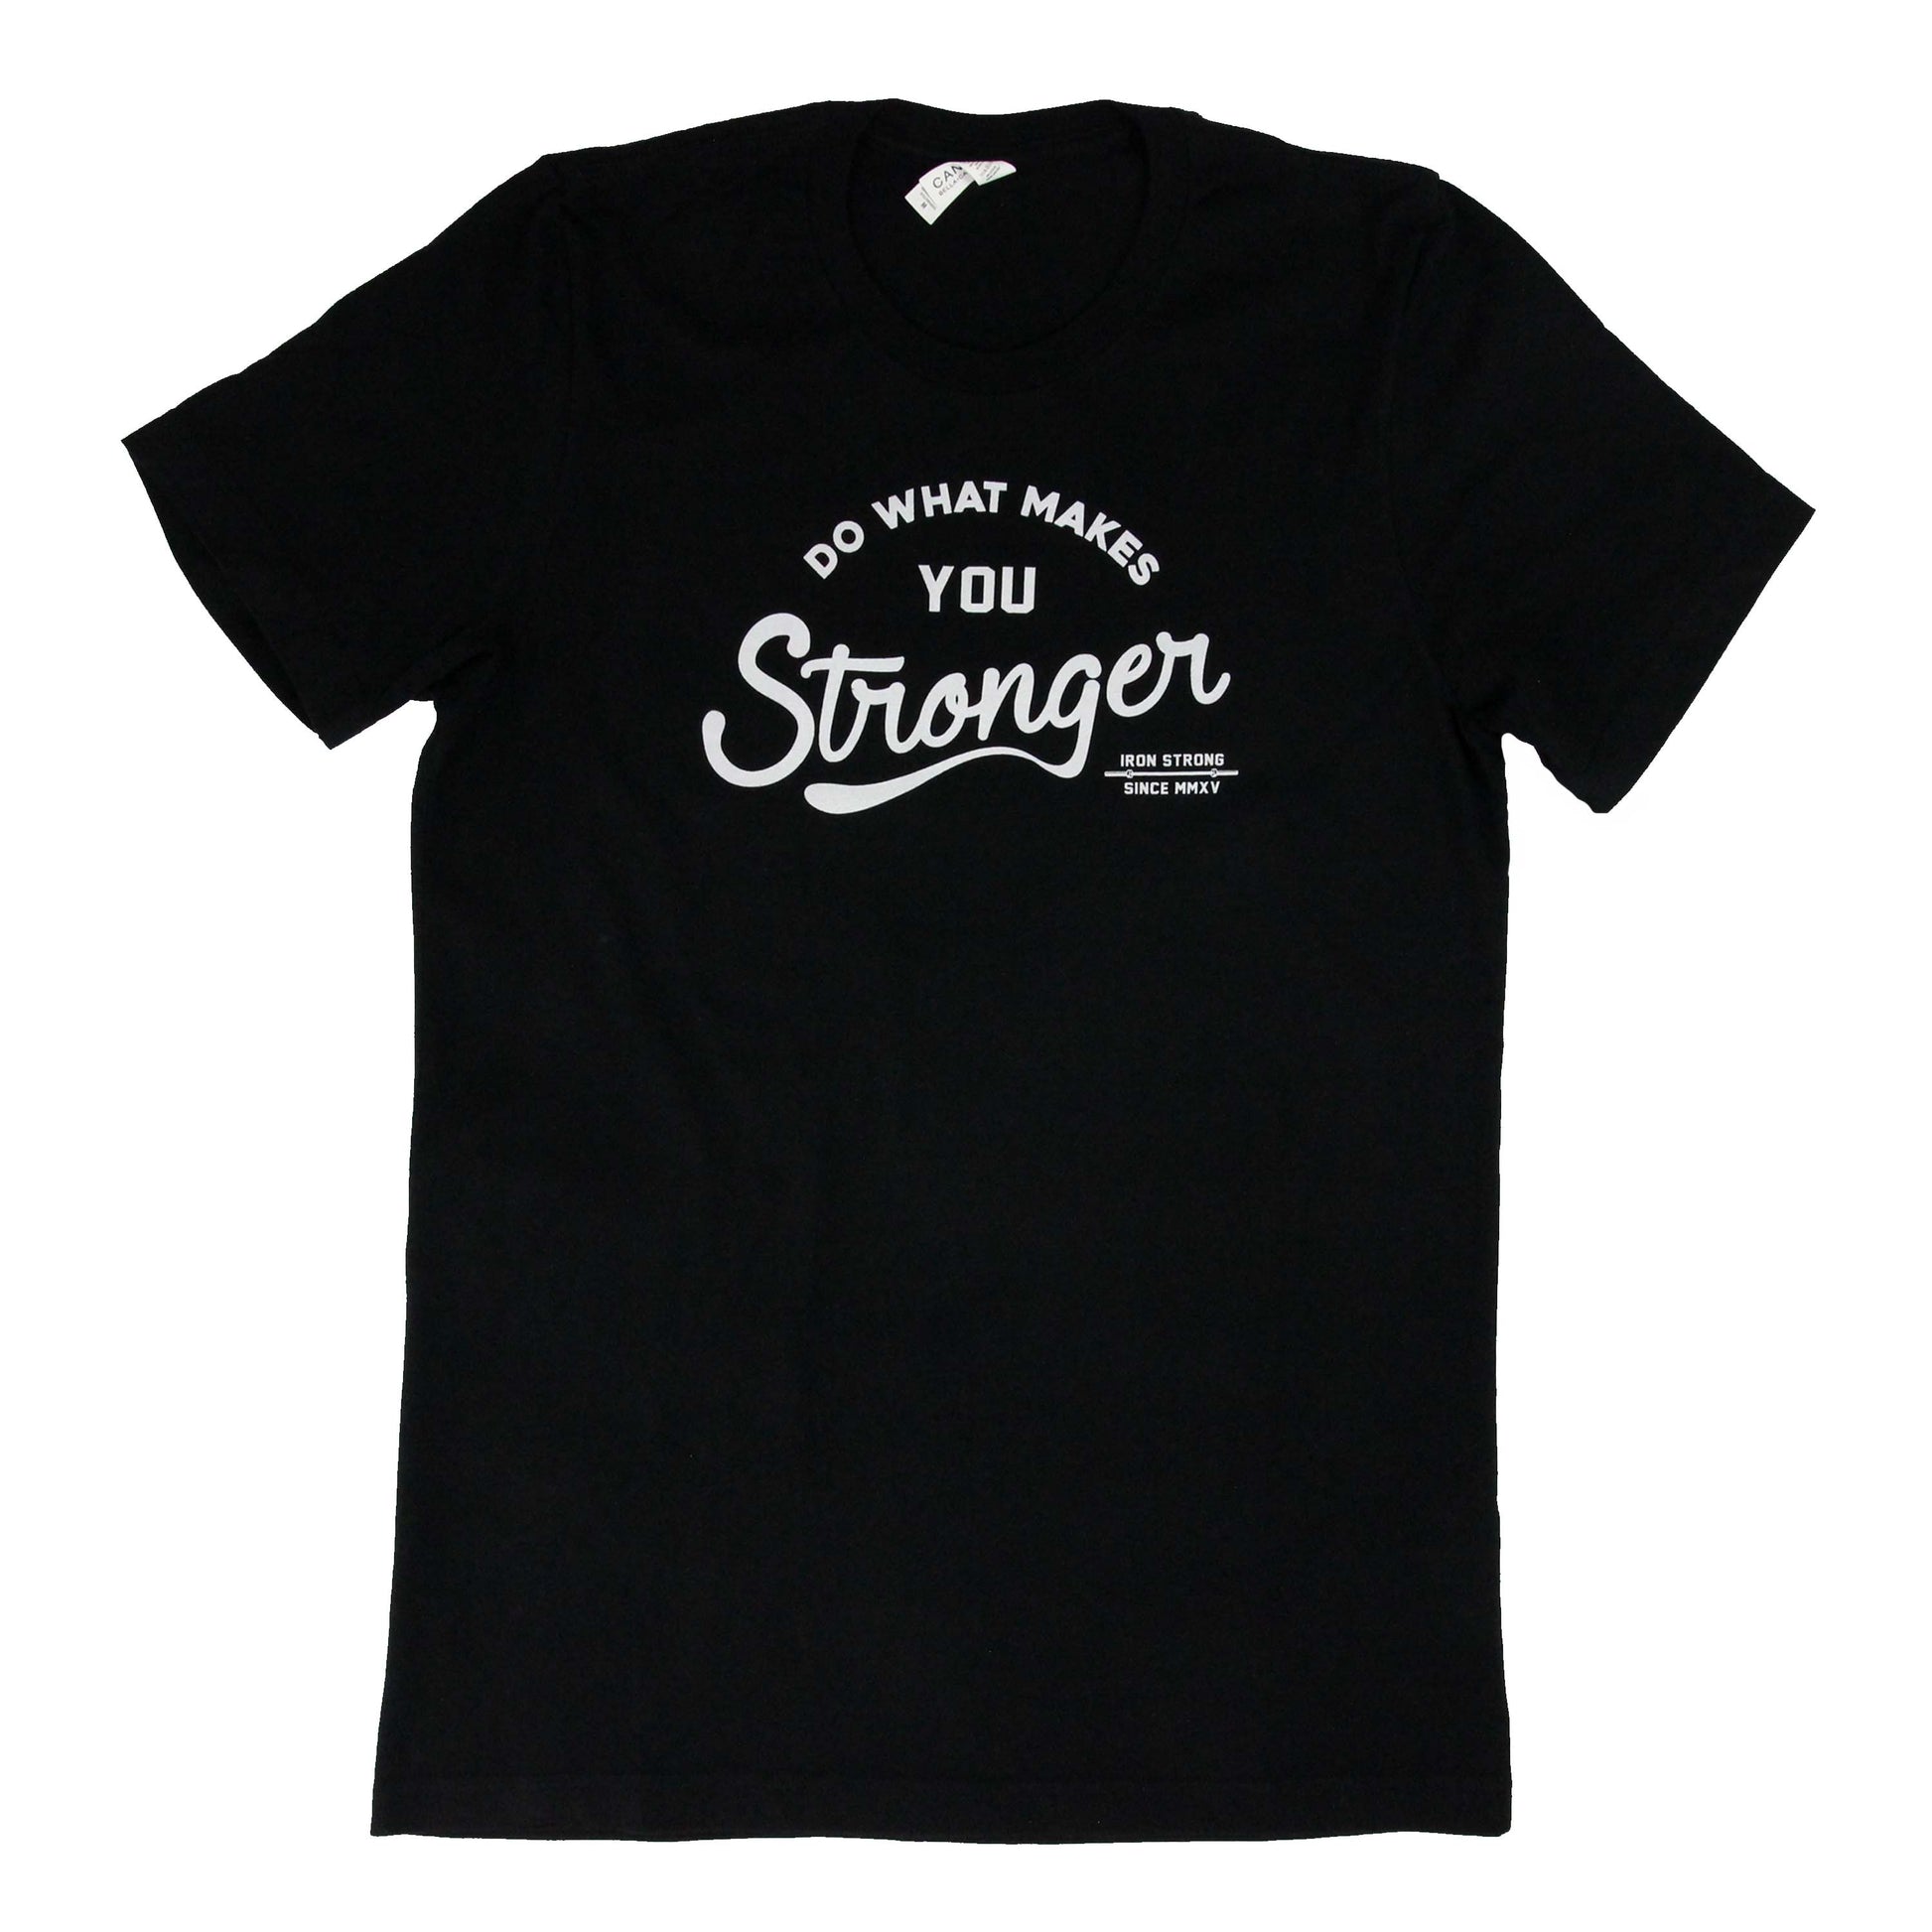 The 'Stronger' weightlifting shirt | Iron Strong Apparel